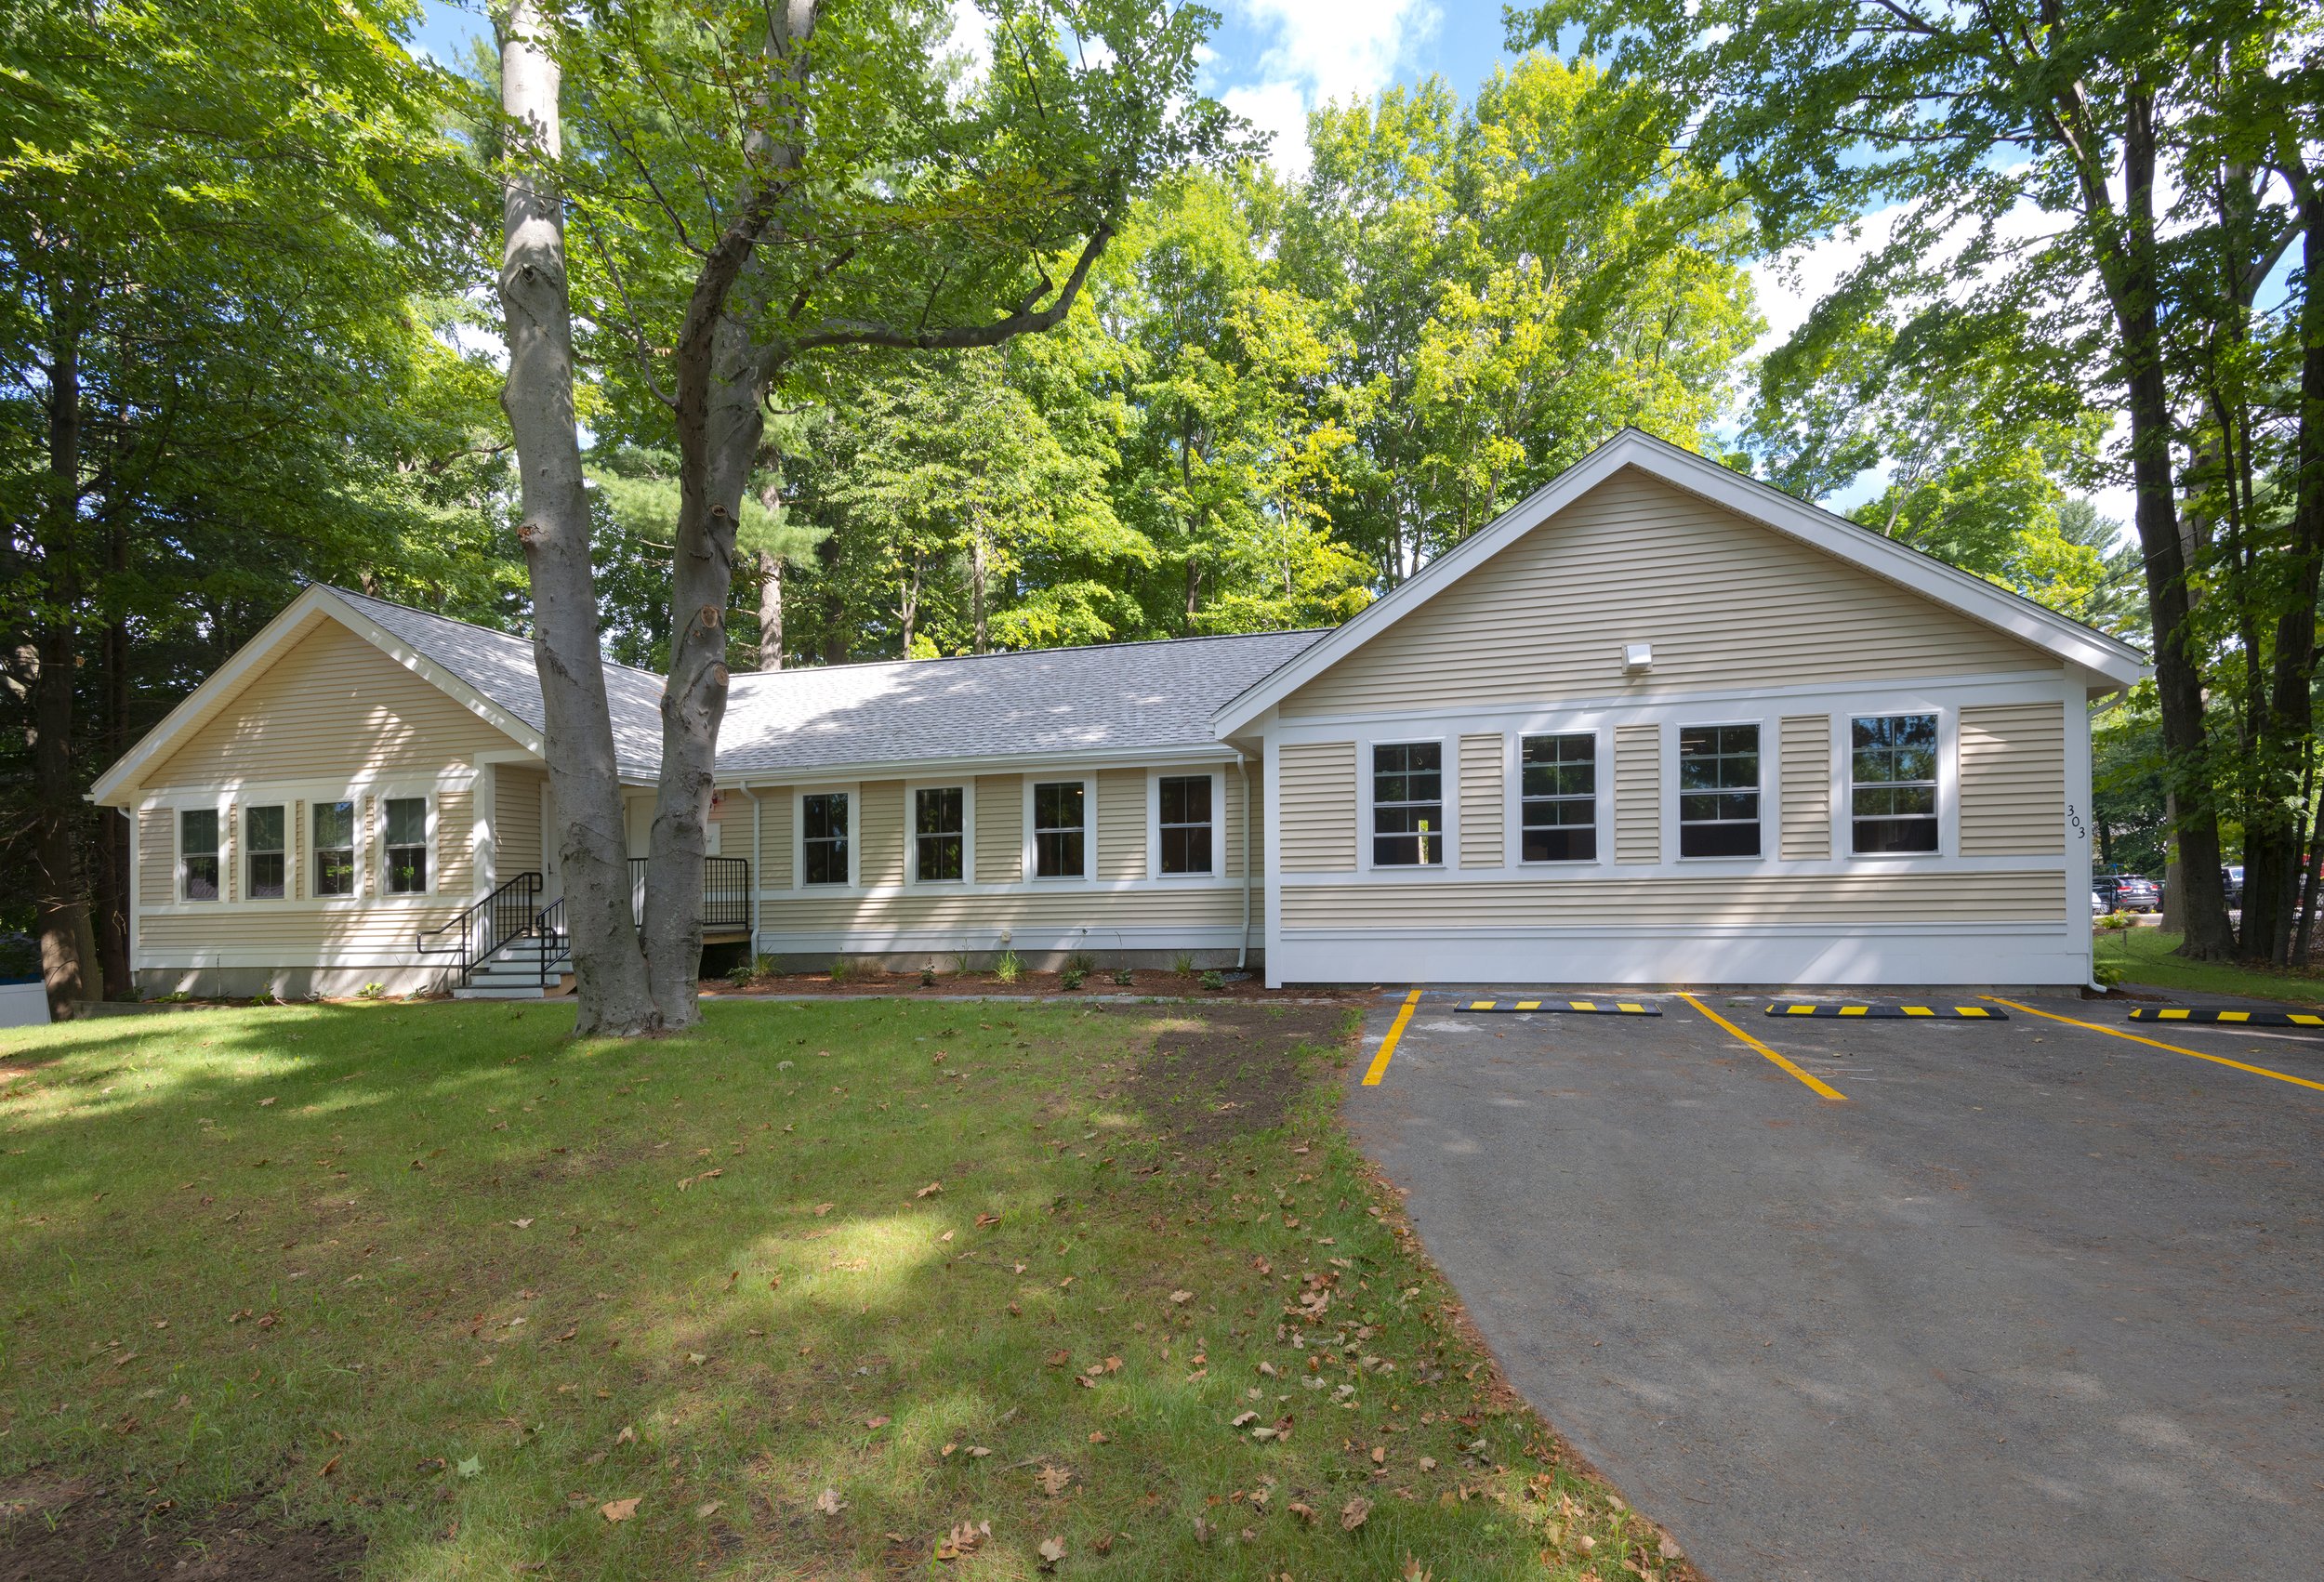  Existing ranch house at Summit Montessori in Framingham 